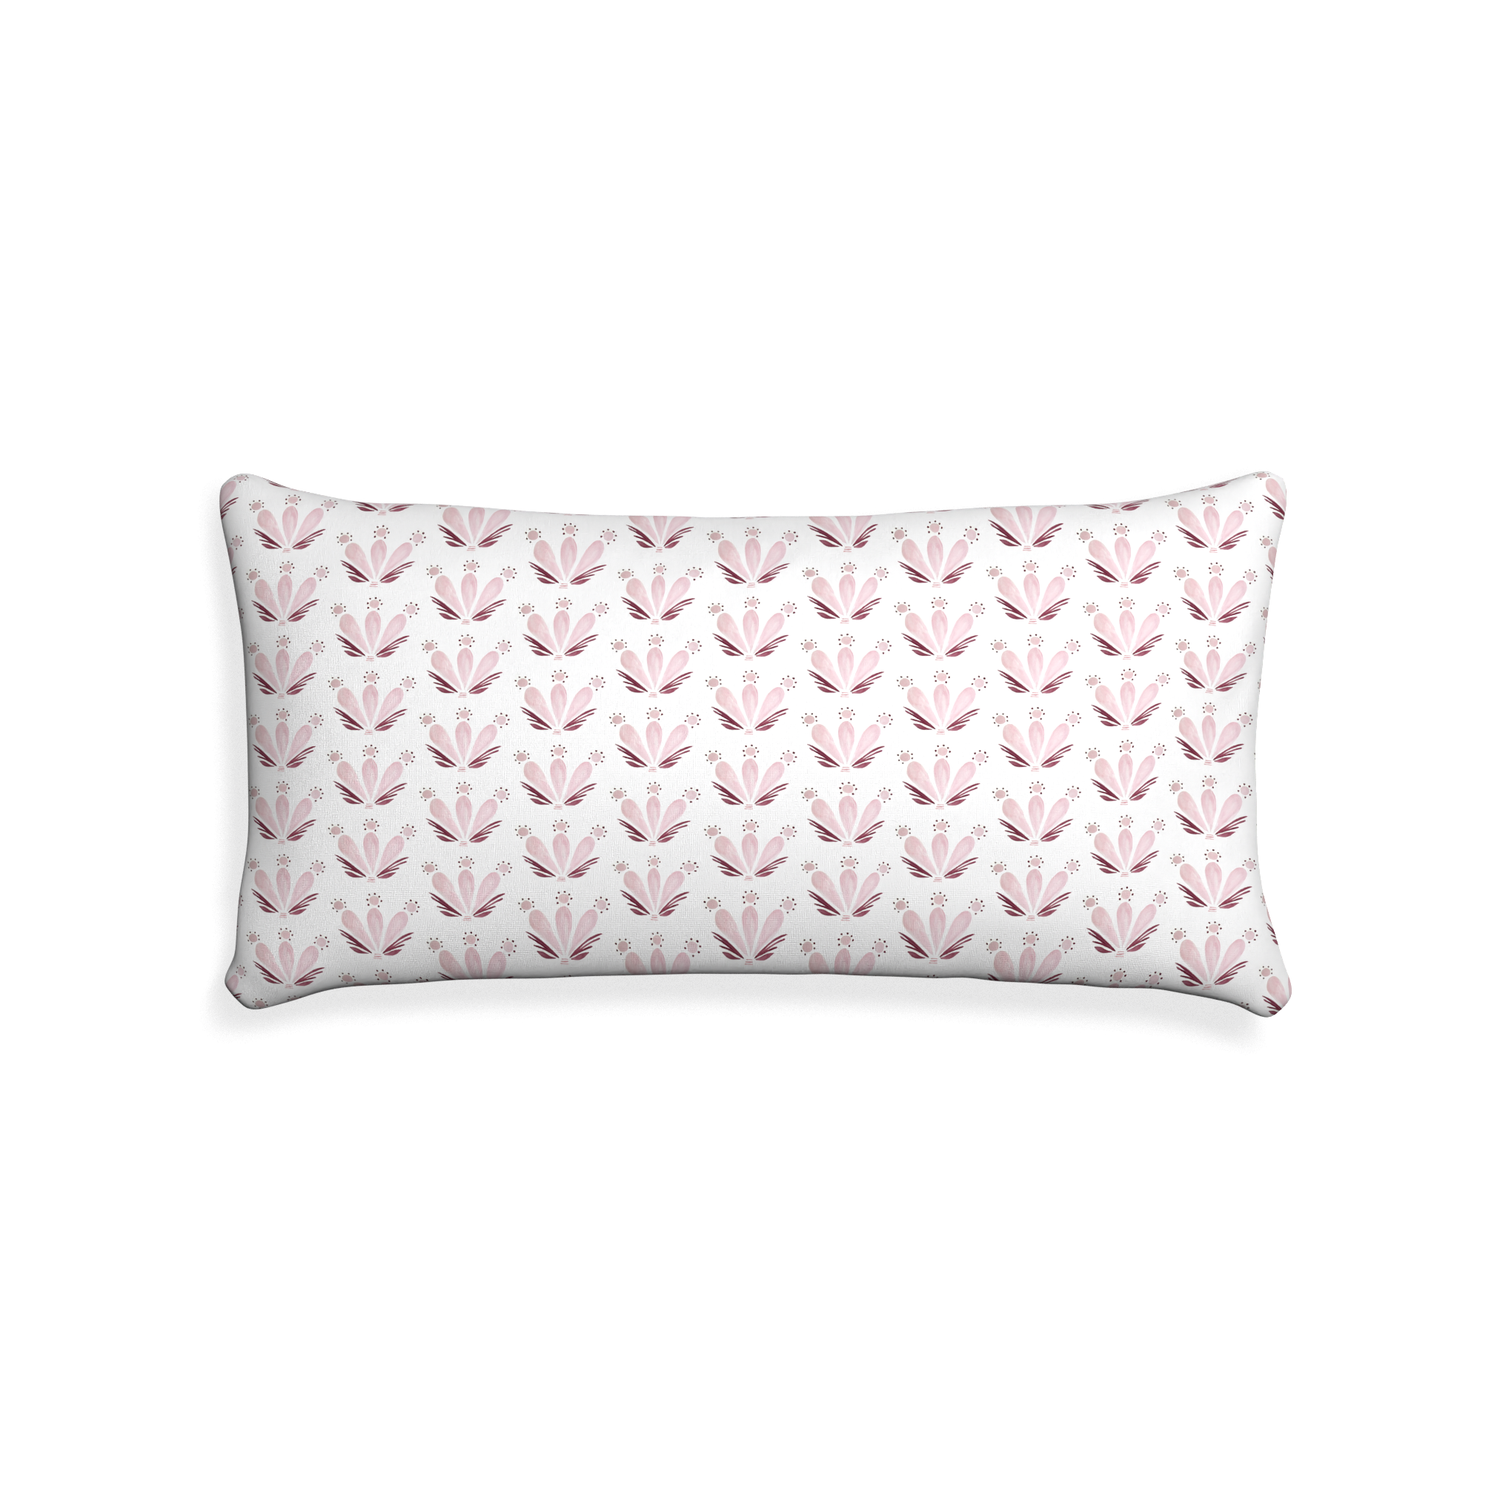 Midi-lumbar serena pink custom pink & burgundy drop repeat floralpillow with none on white background